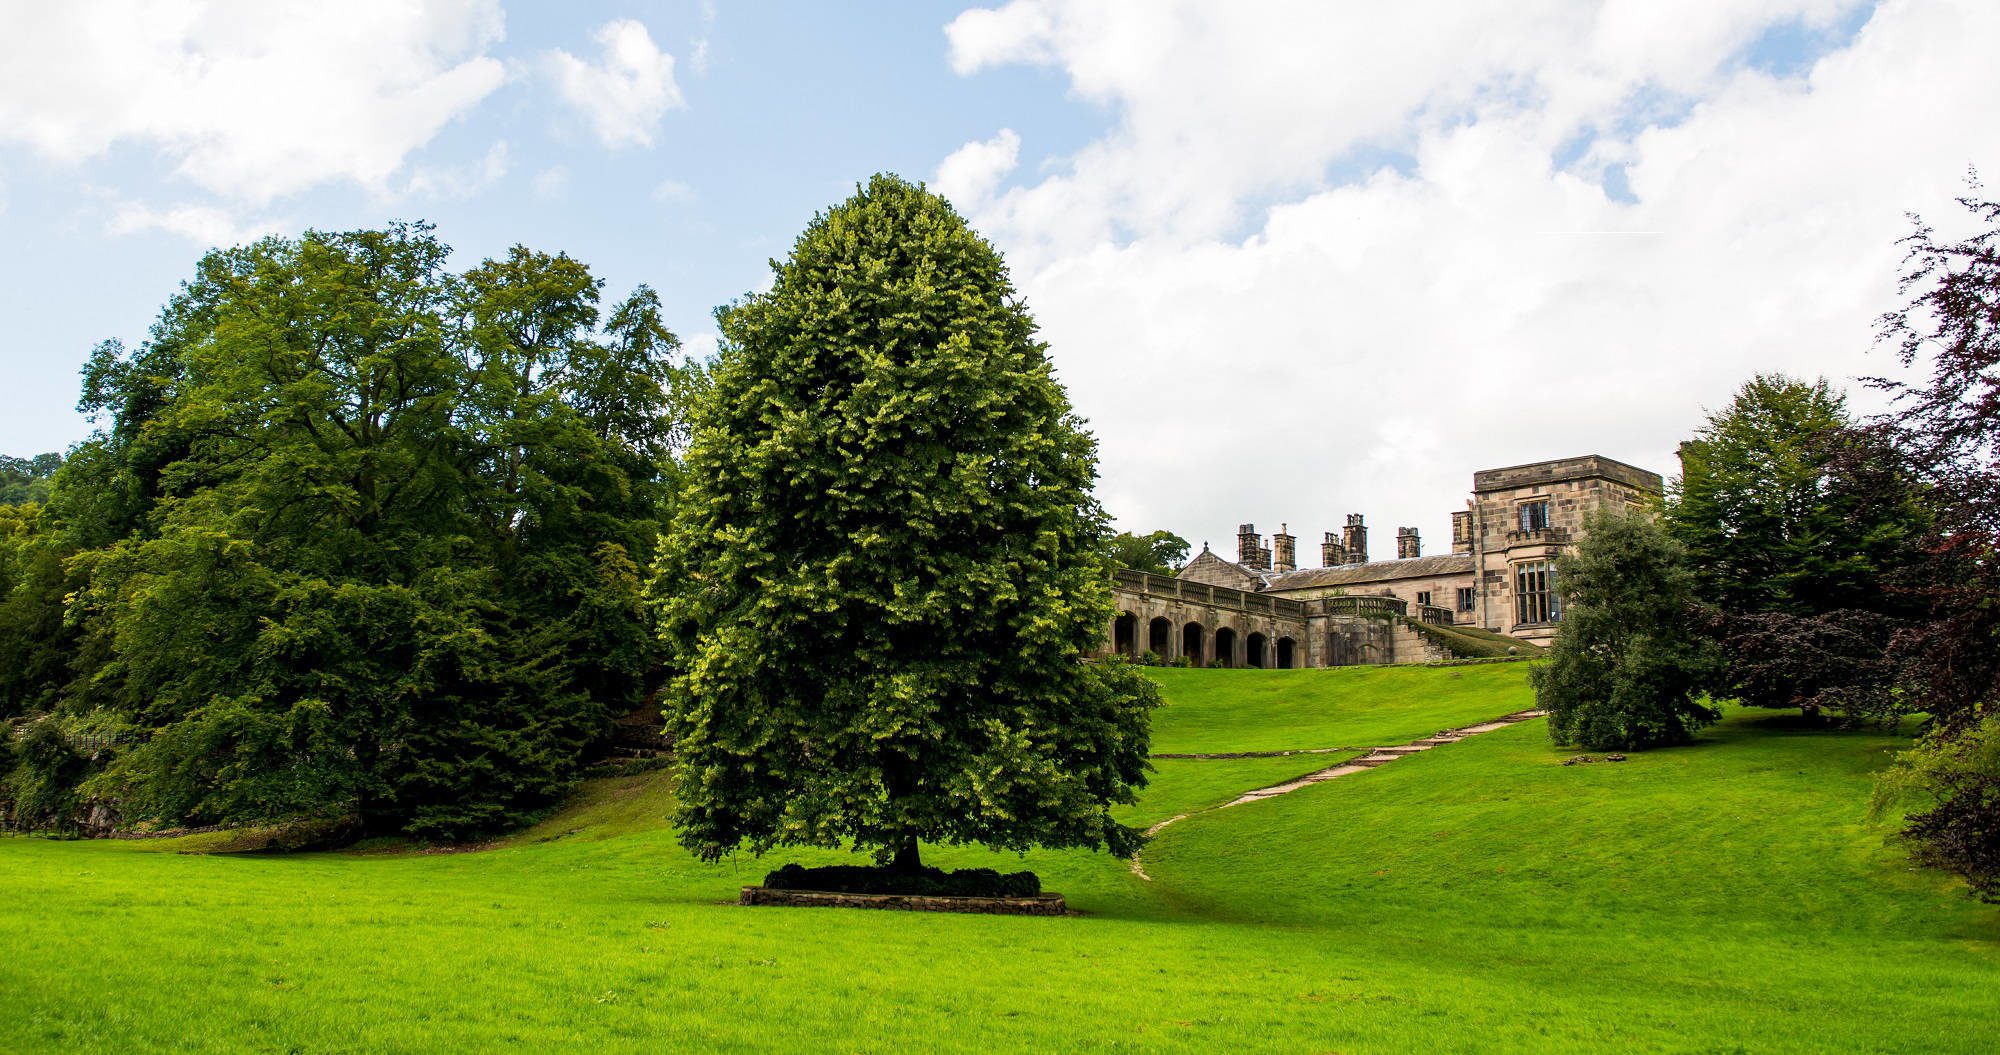 Ilam Hall in spring